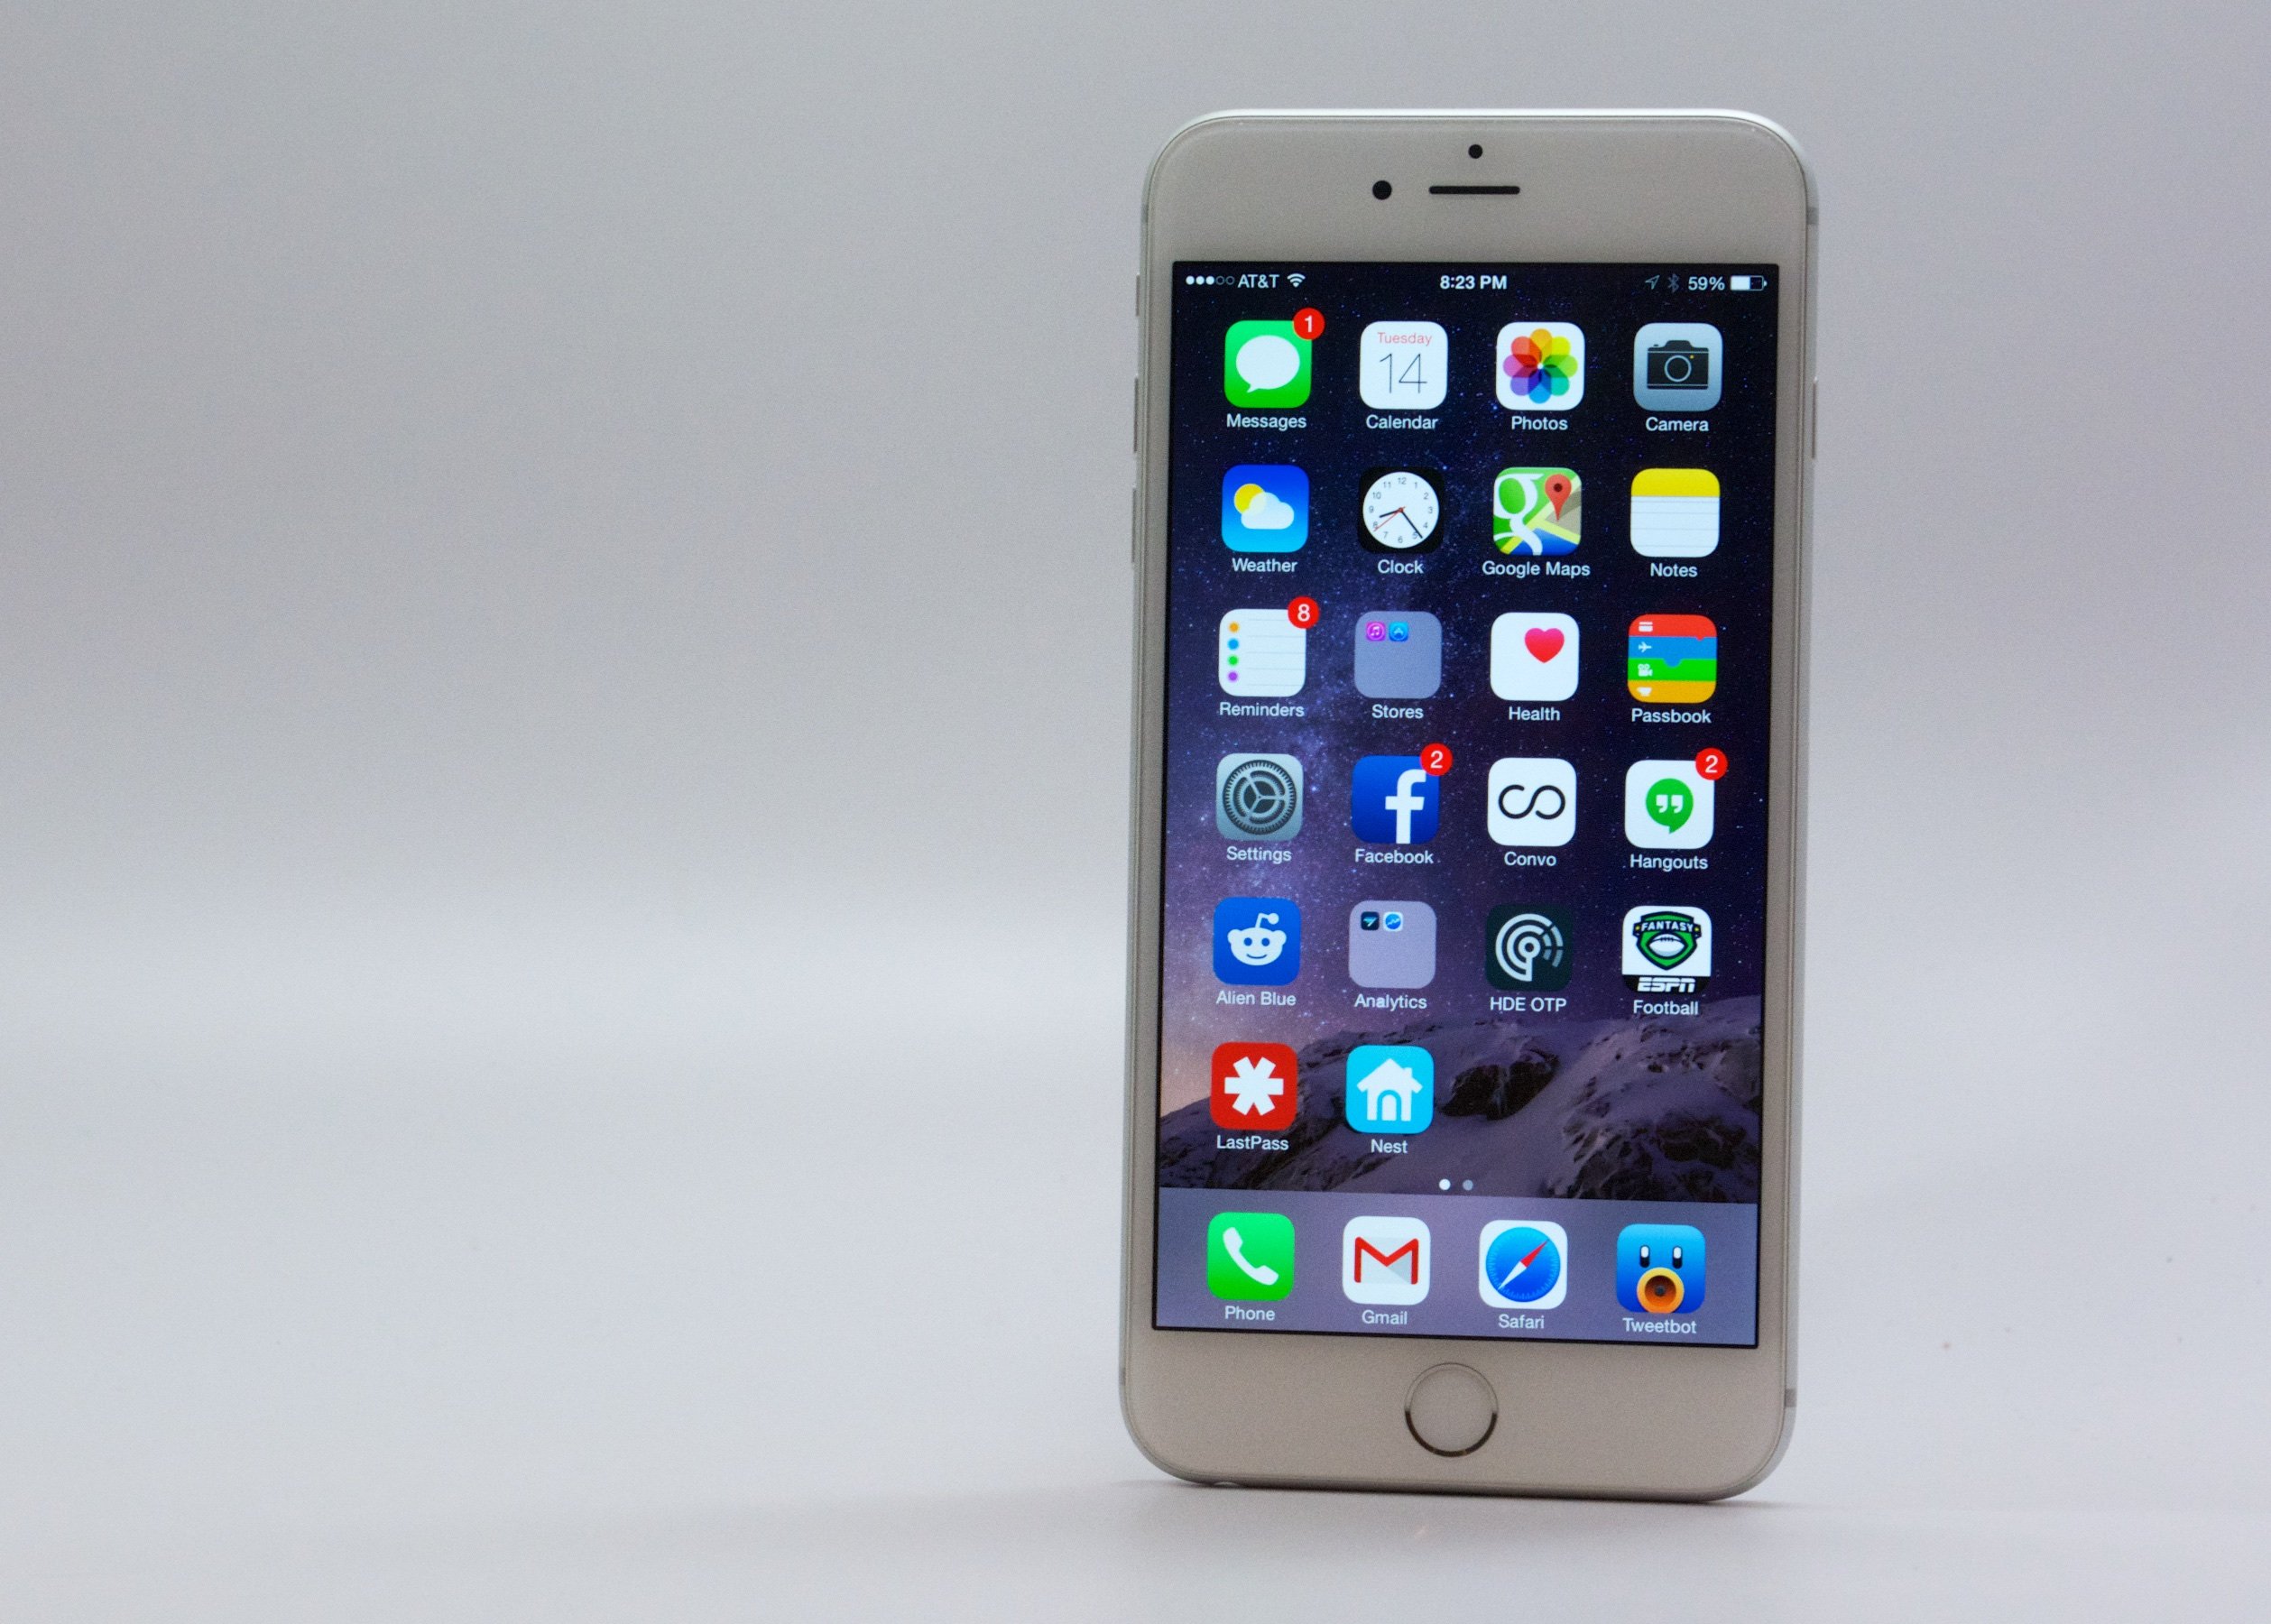 iOS 8.3 helped fix some iPhone WiFi problems, but not all are gone.